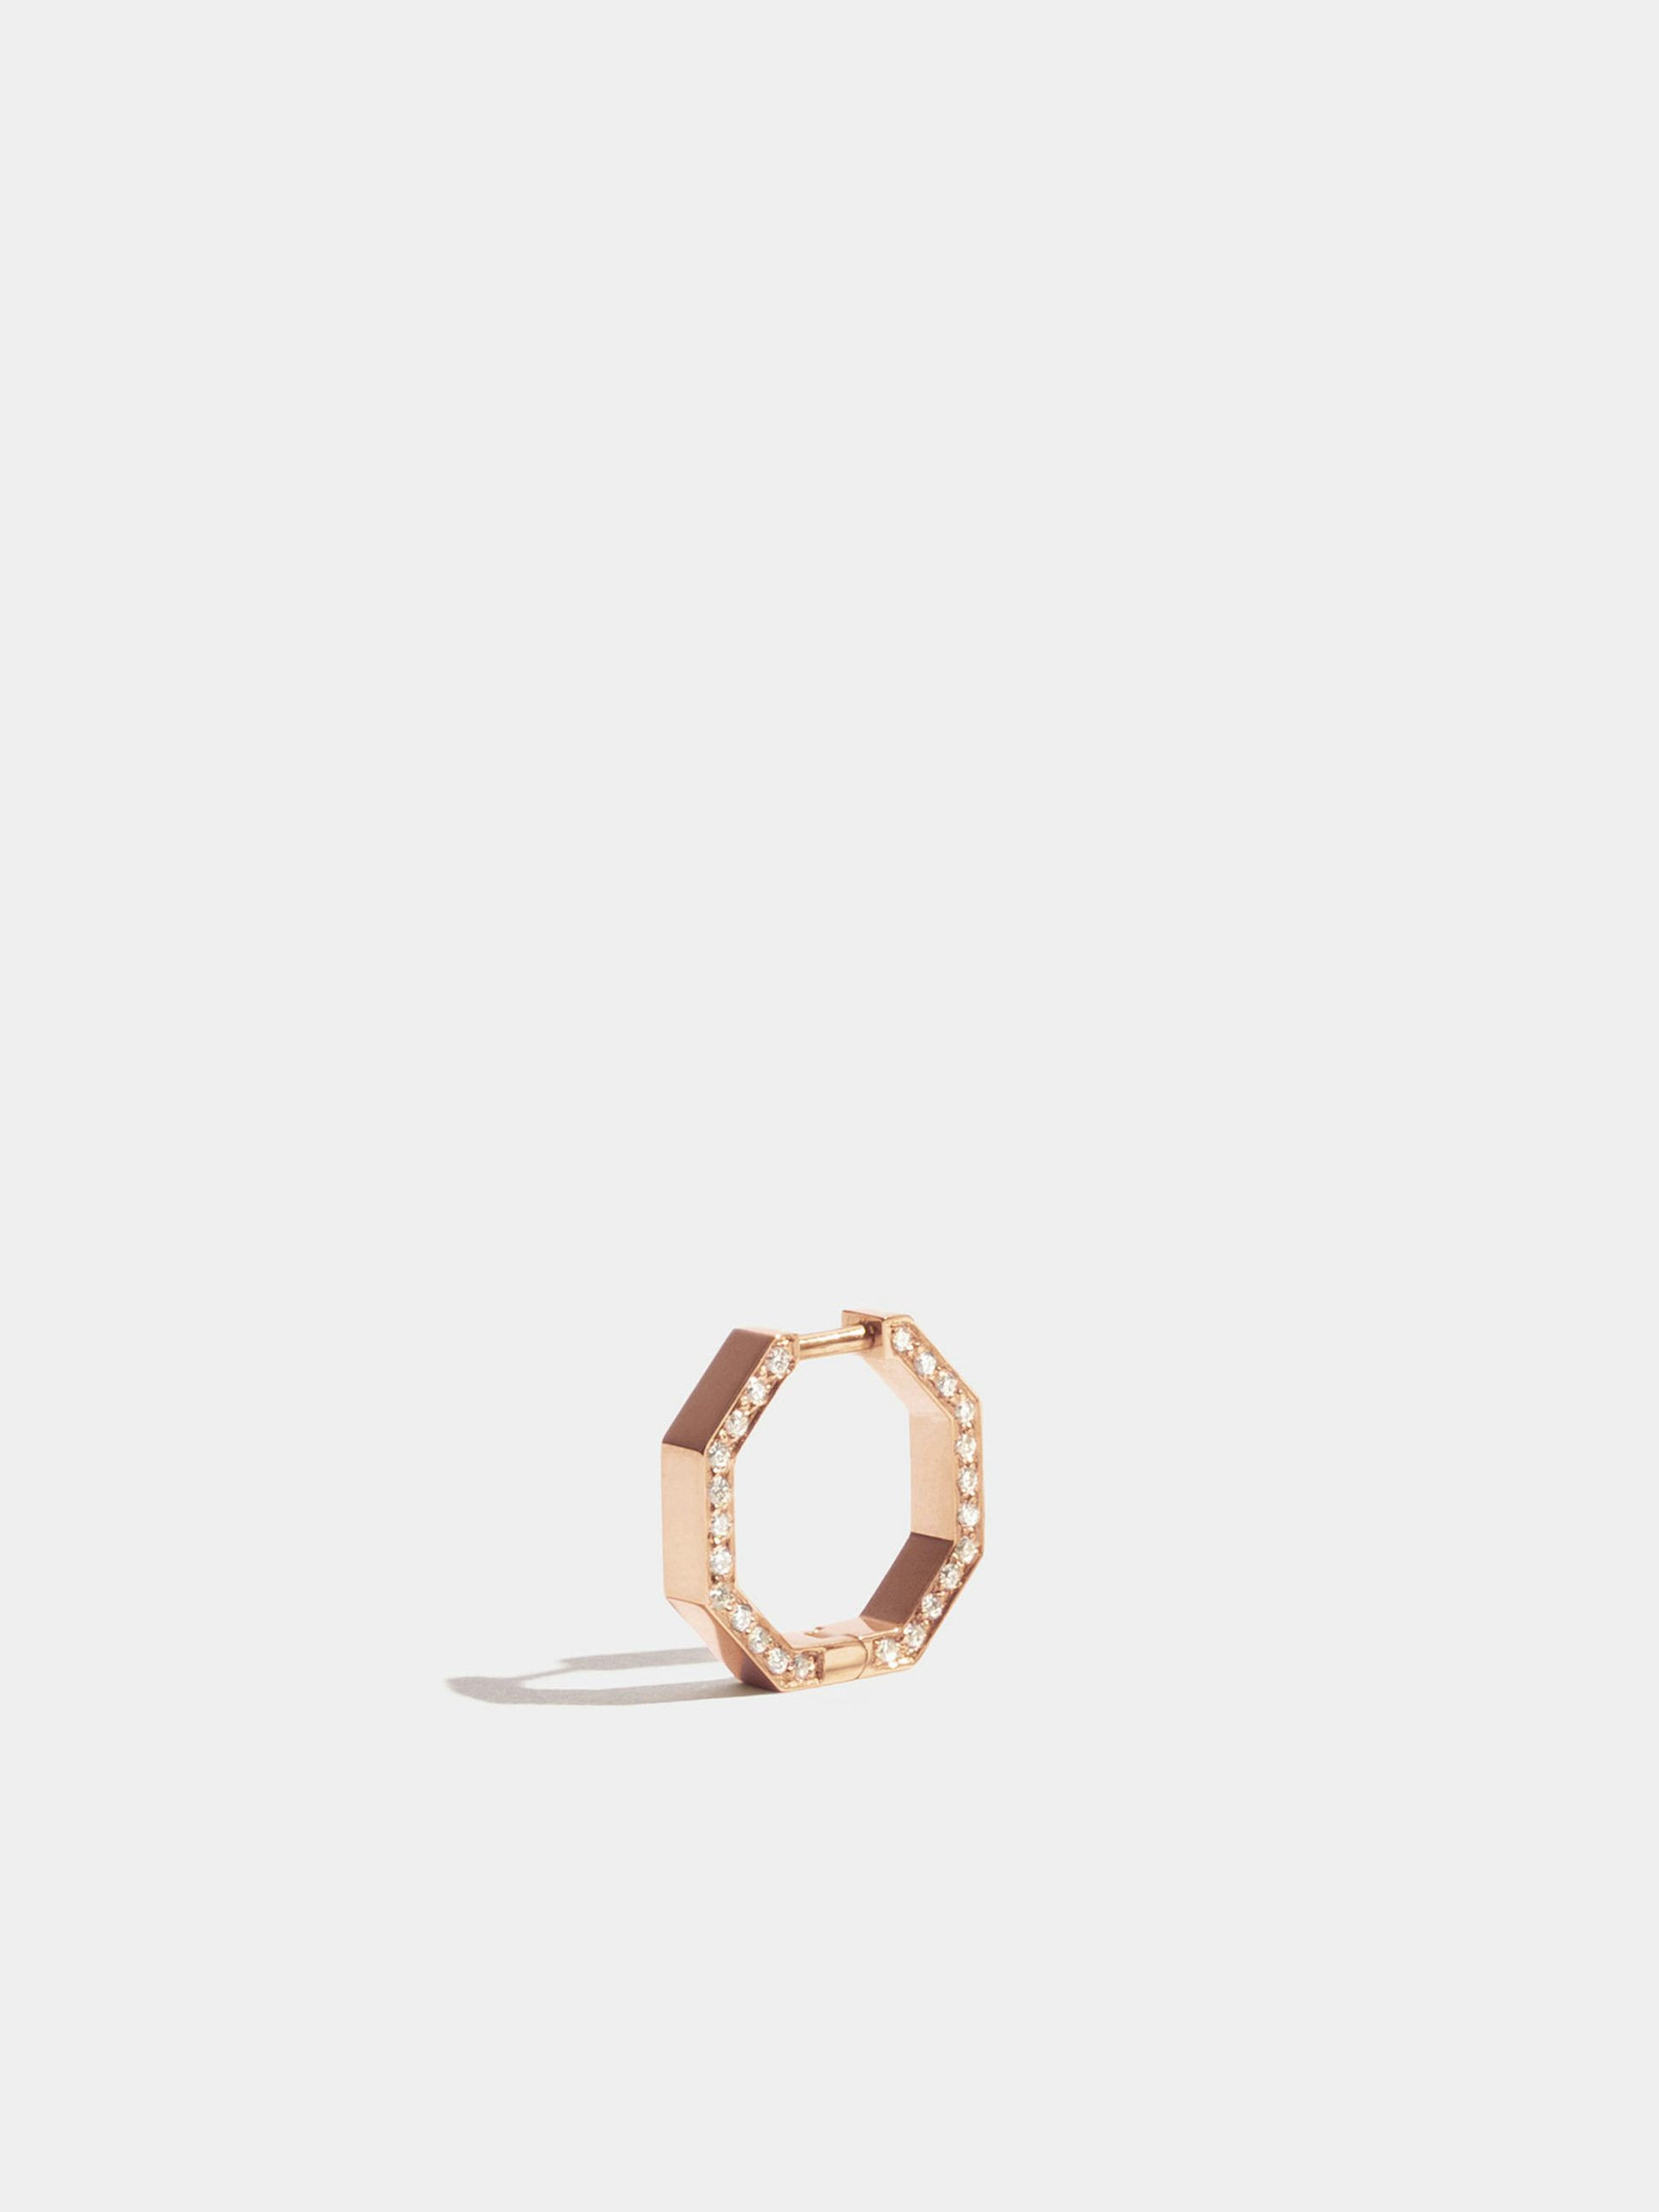  Octogone 13mm single-loop in 18k Fairmined ethical rose gold, paved with lab-grown diamonds on the edge, the unity. 